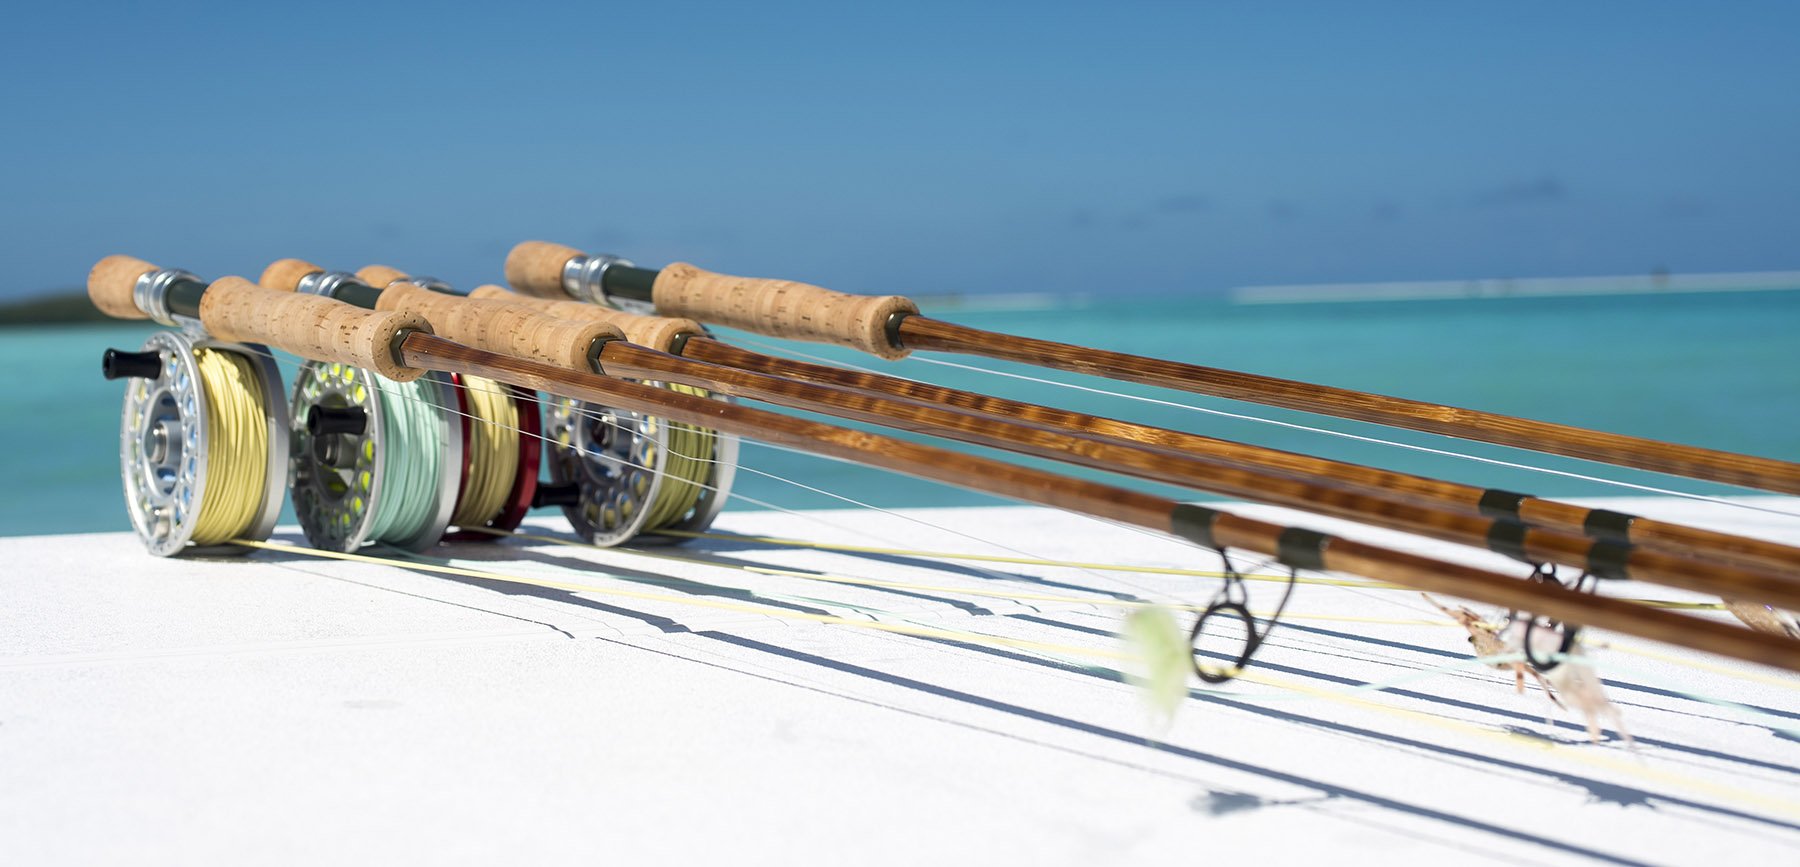 Thomas & Thomas Sextant Bamboo Saltwater Fly Rods